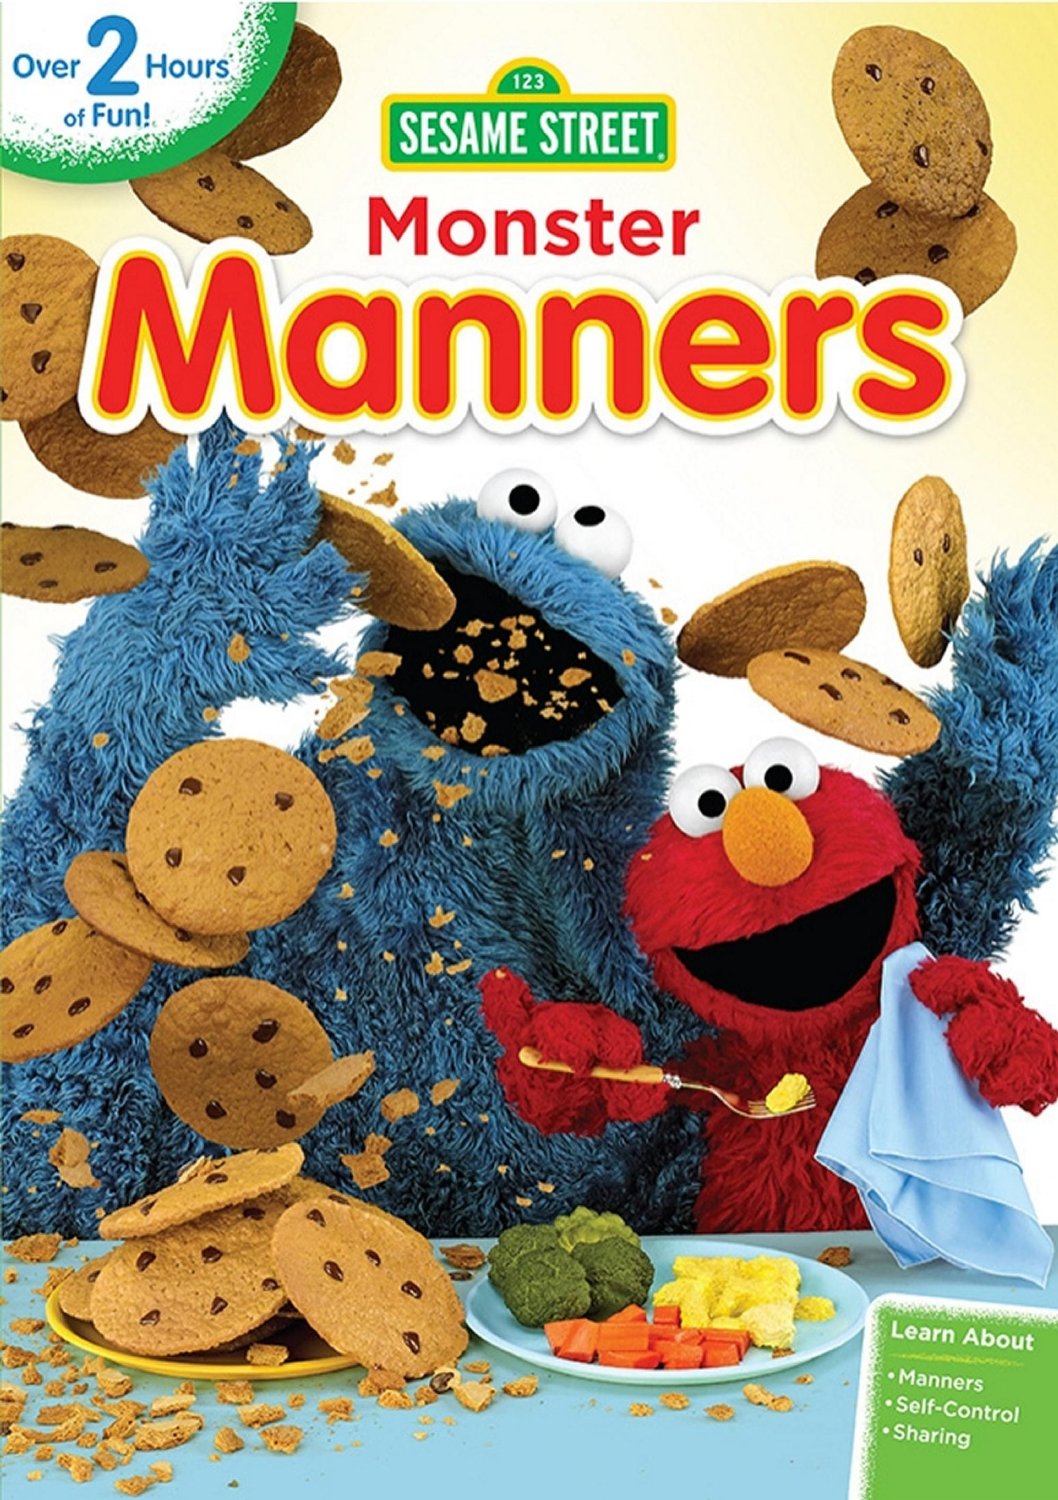 Monster manners